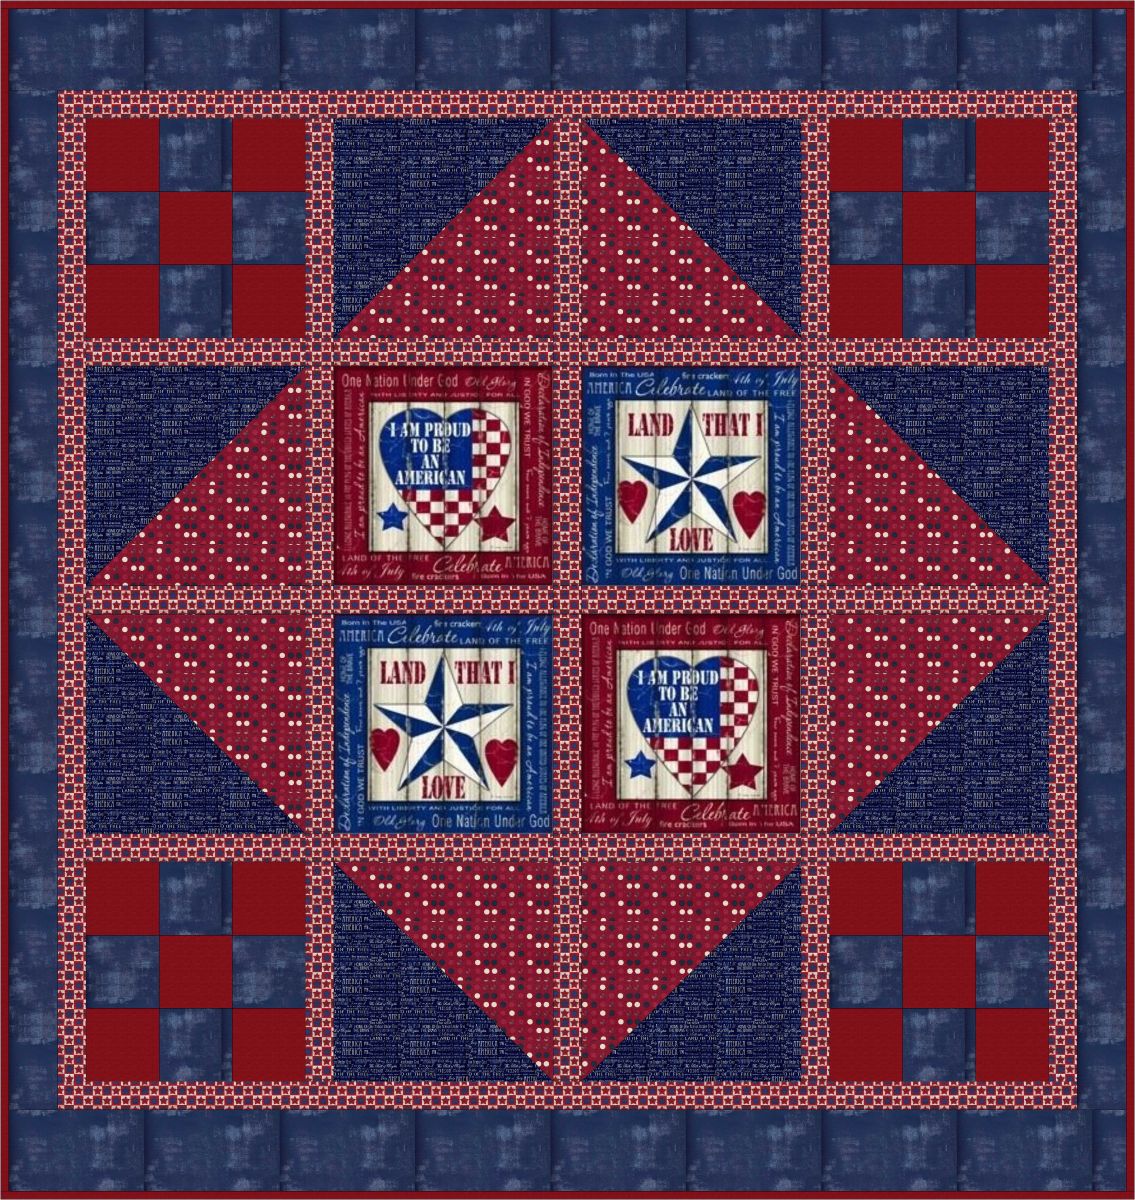 “Proud American” Free Quilts of Valor Pattern designed by Debbie Chambers from the Quilts of Valor Foundation